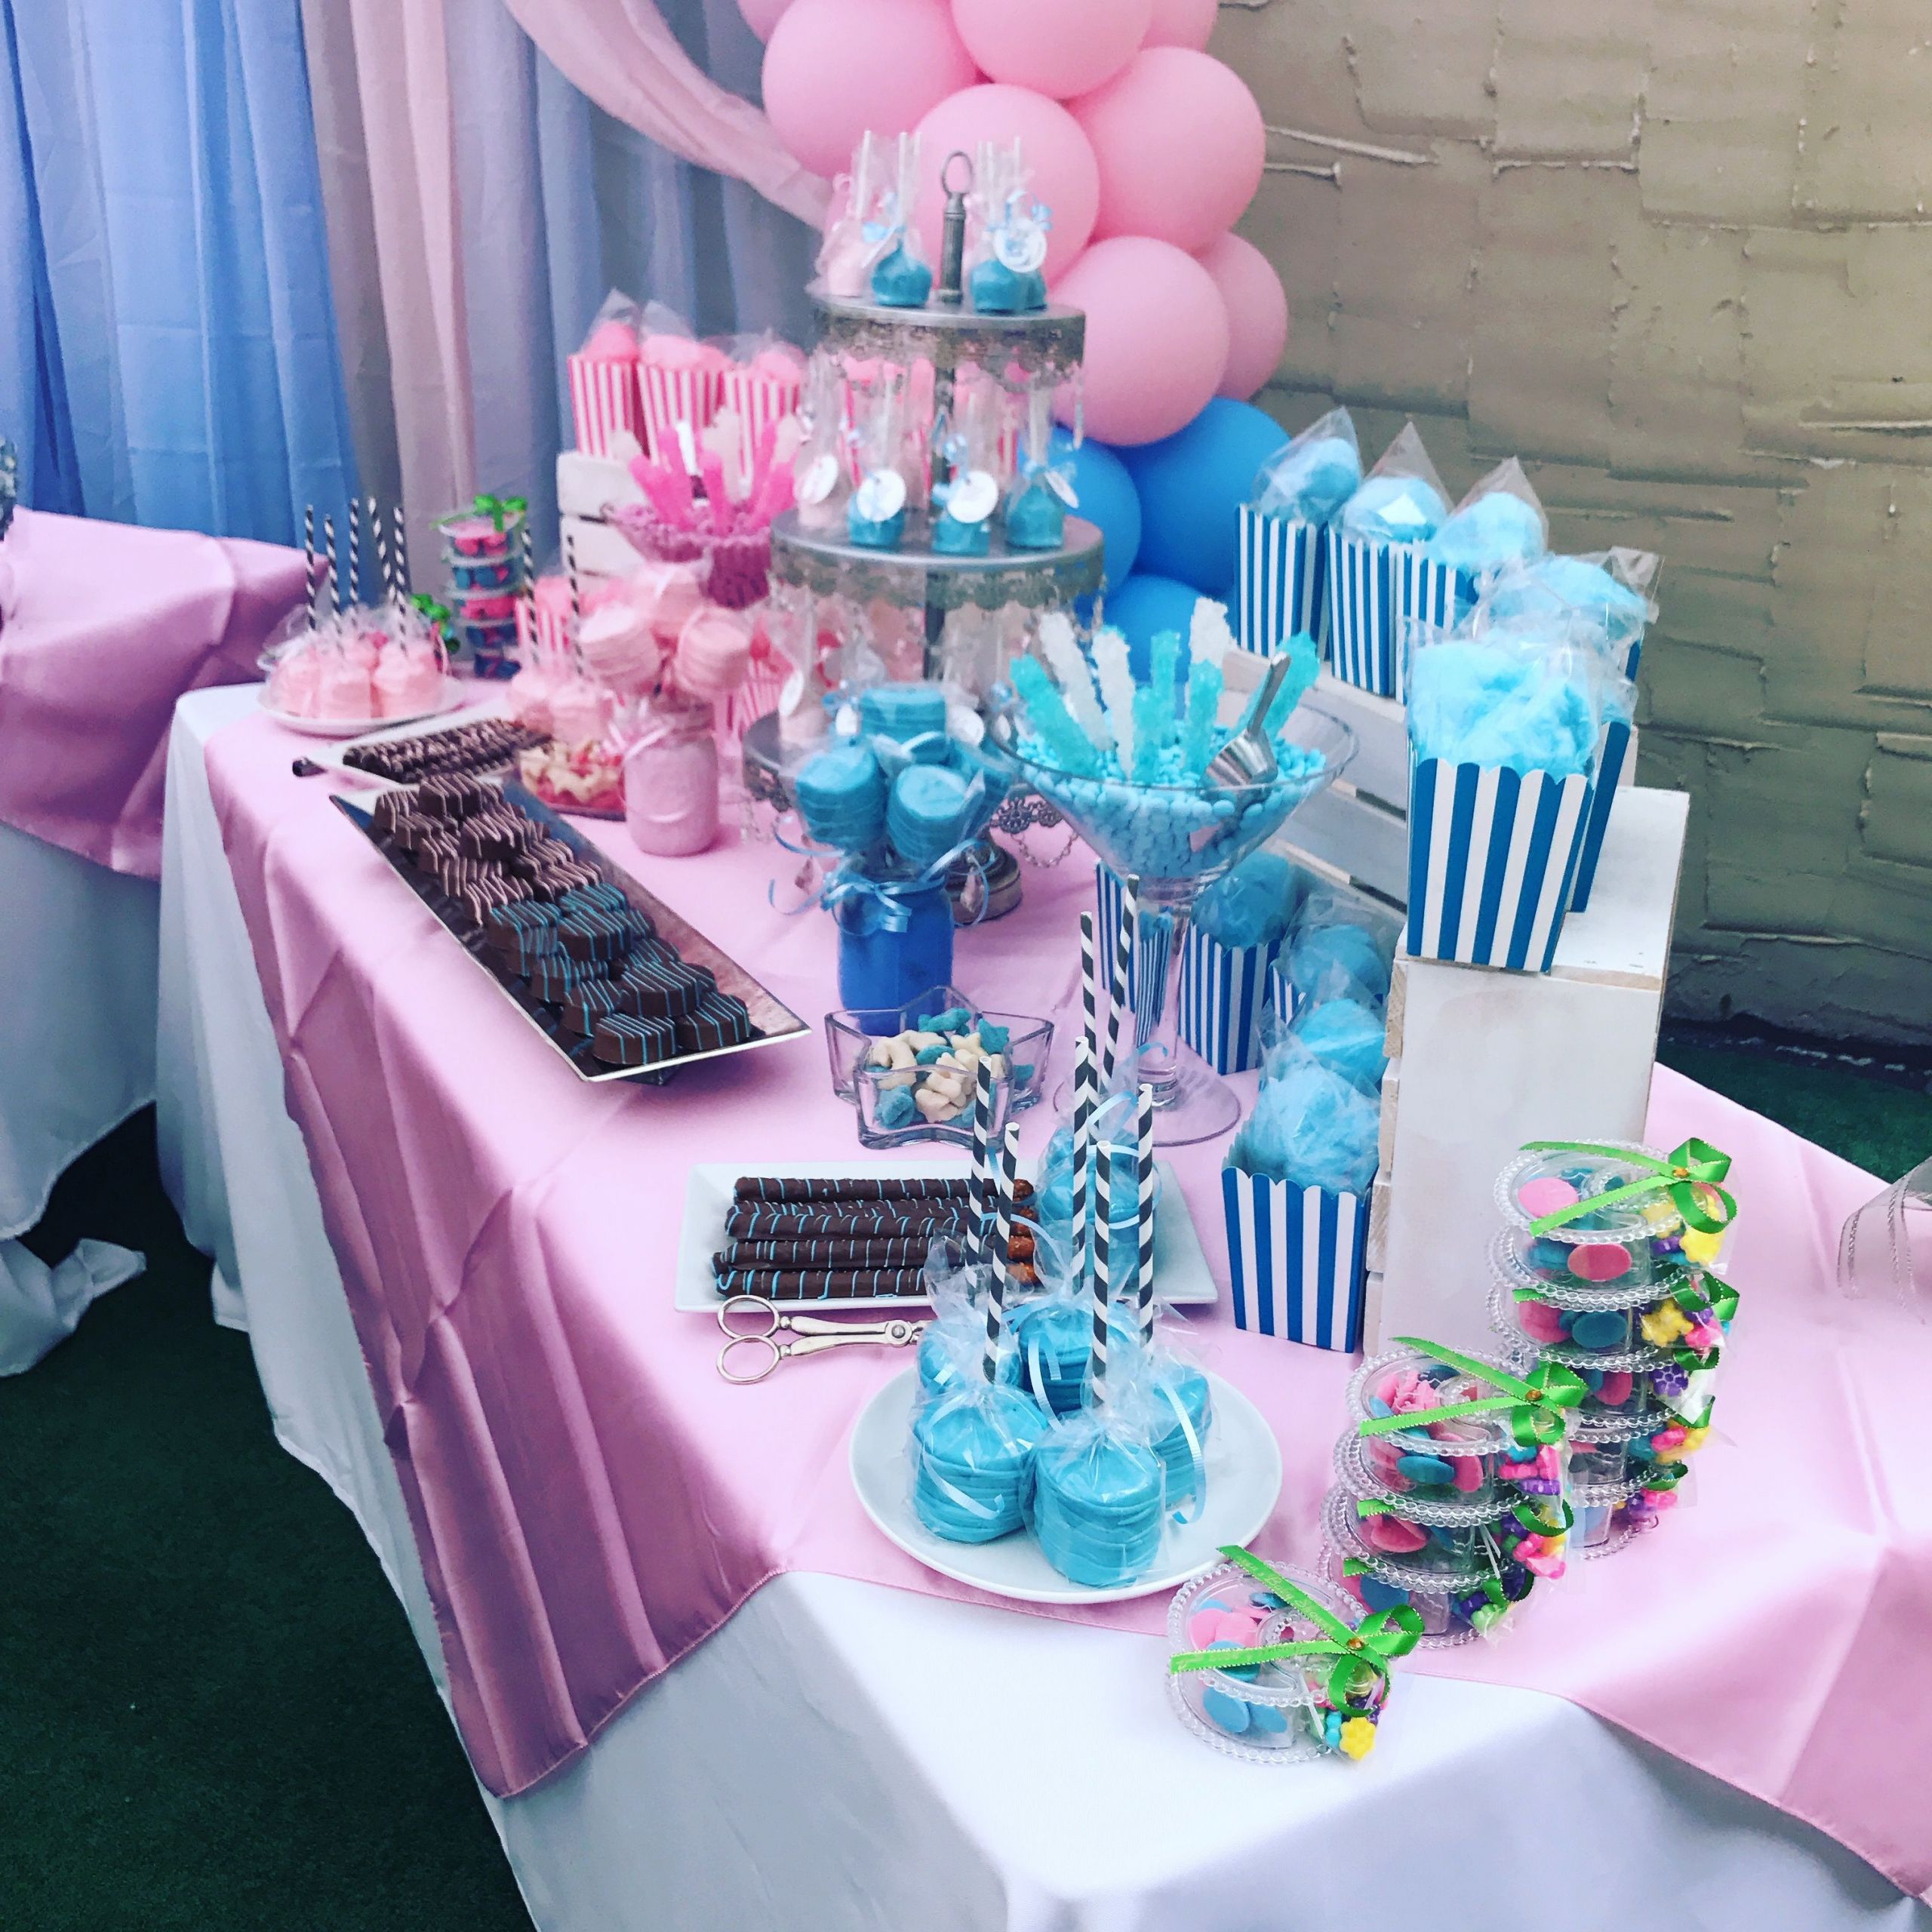 Baby Shower Gender Reveal Party Ideas
 Baby shower candy table that we made for a gender reveal party